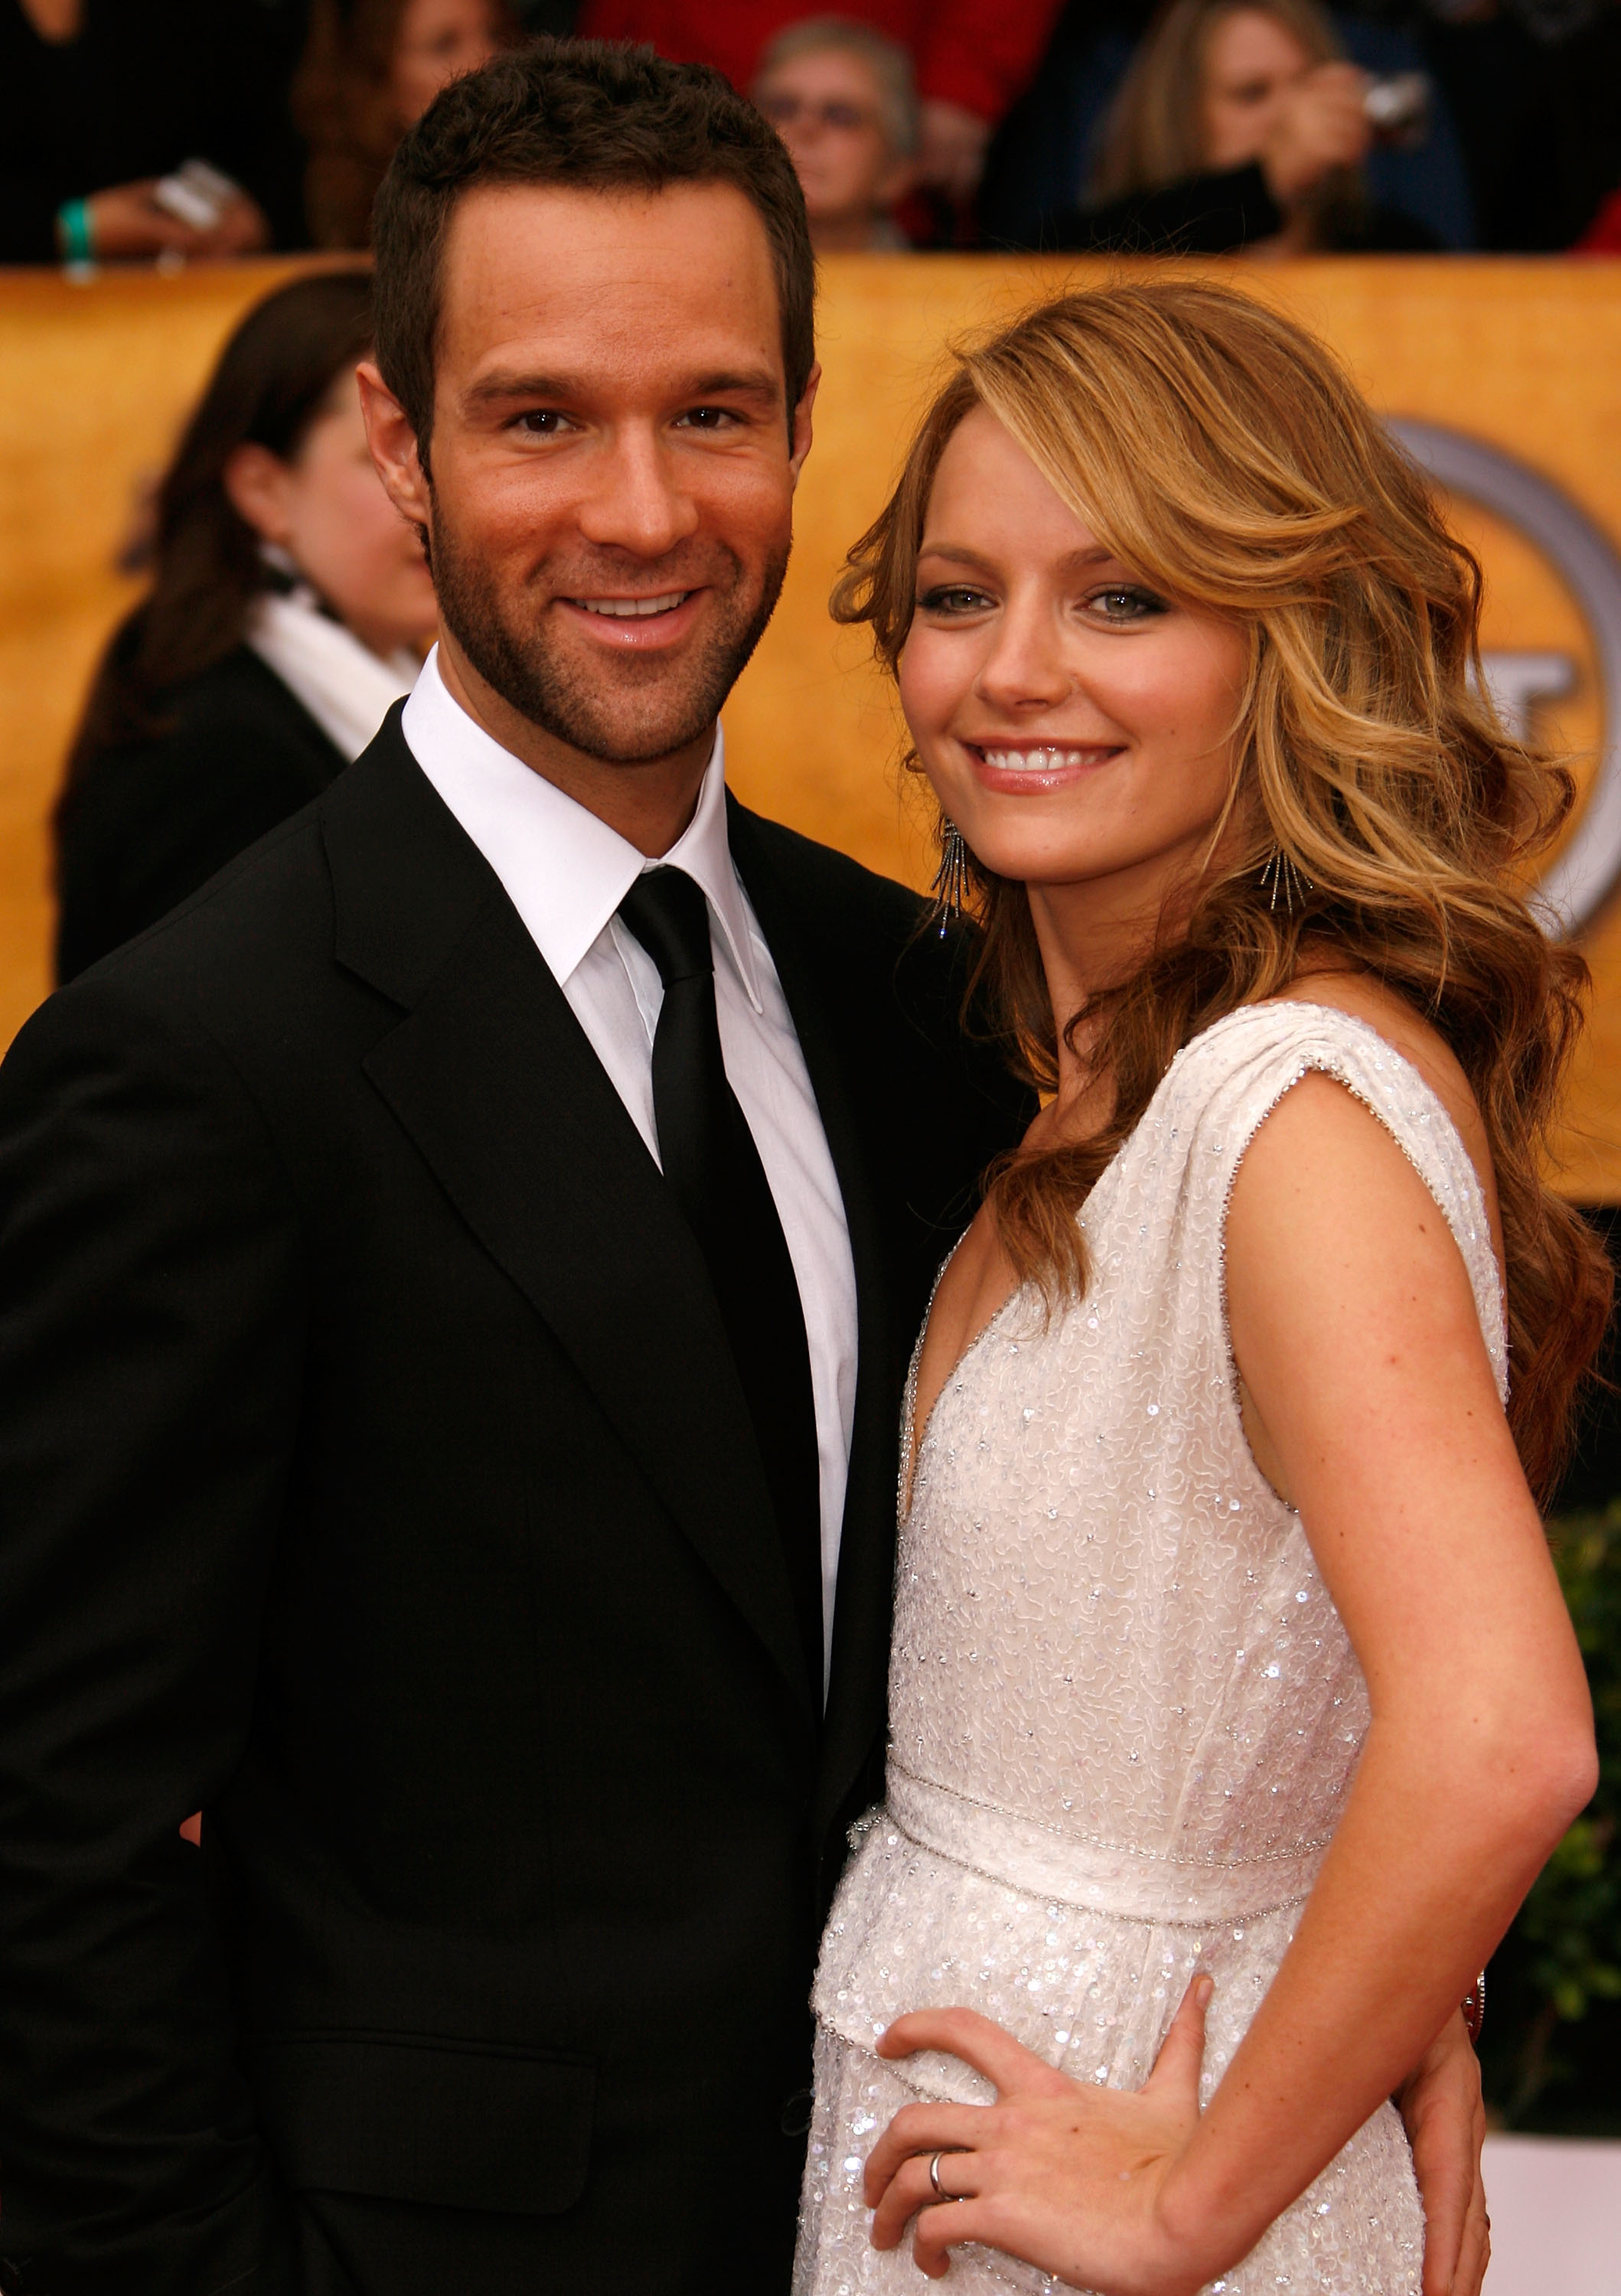 Chris Diamantopoulos and Becki Newton at the Shrine Auditorium on January 27, 2008, in Los Angeles, California. | Source: Getty Images